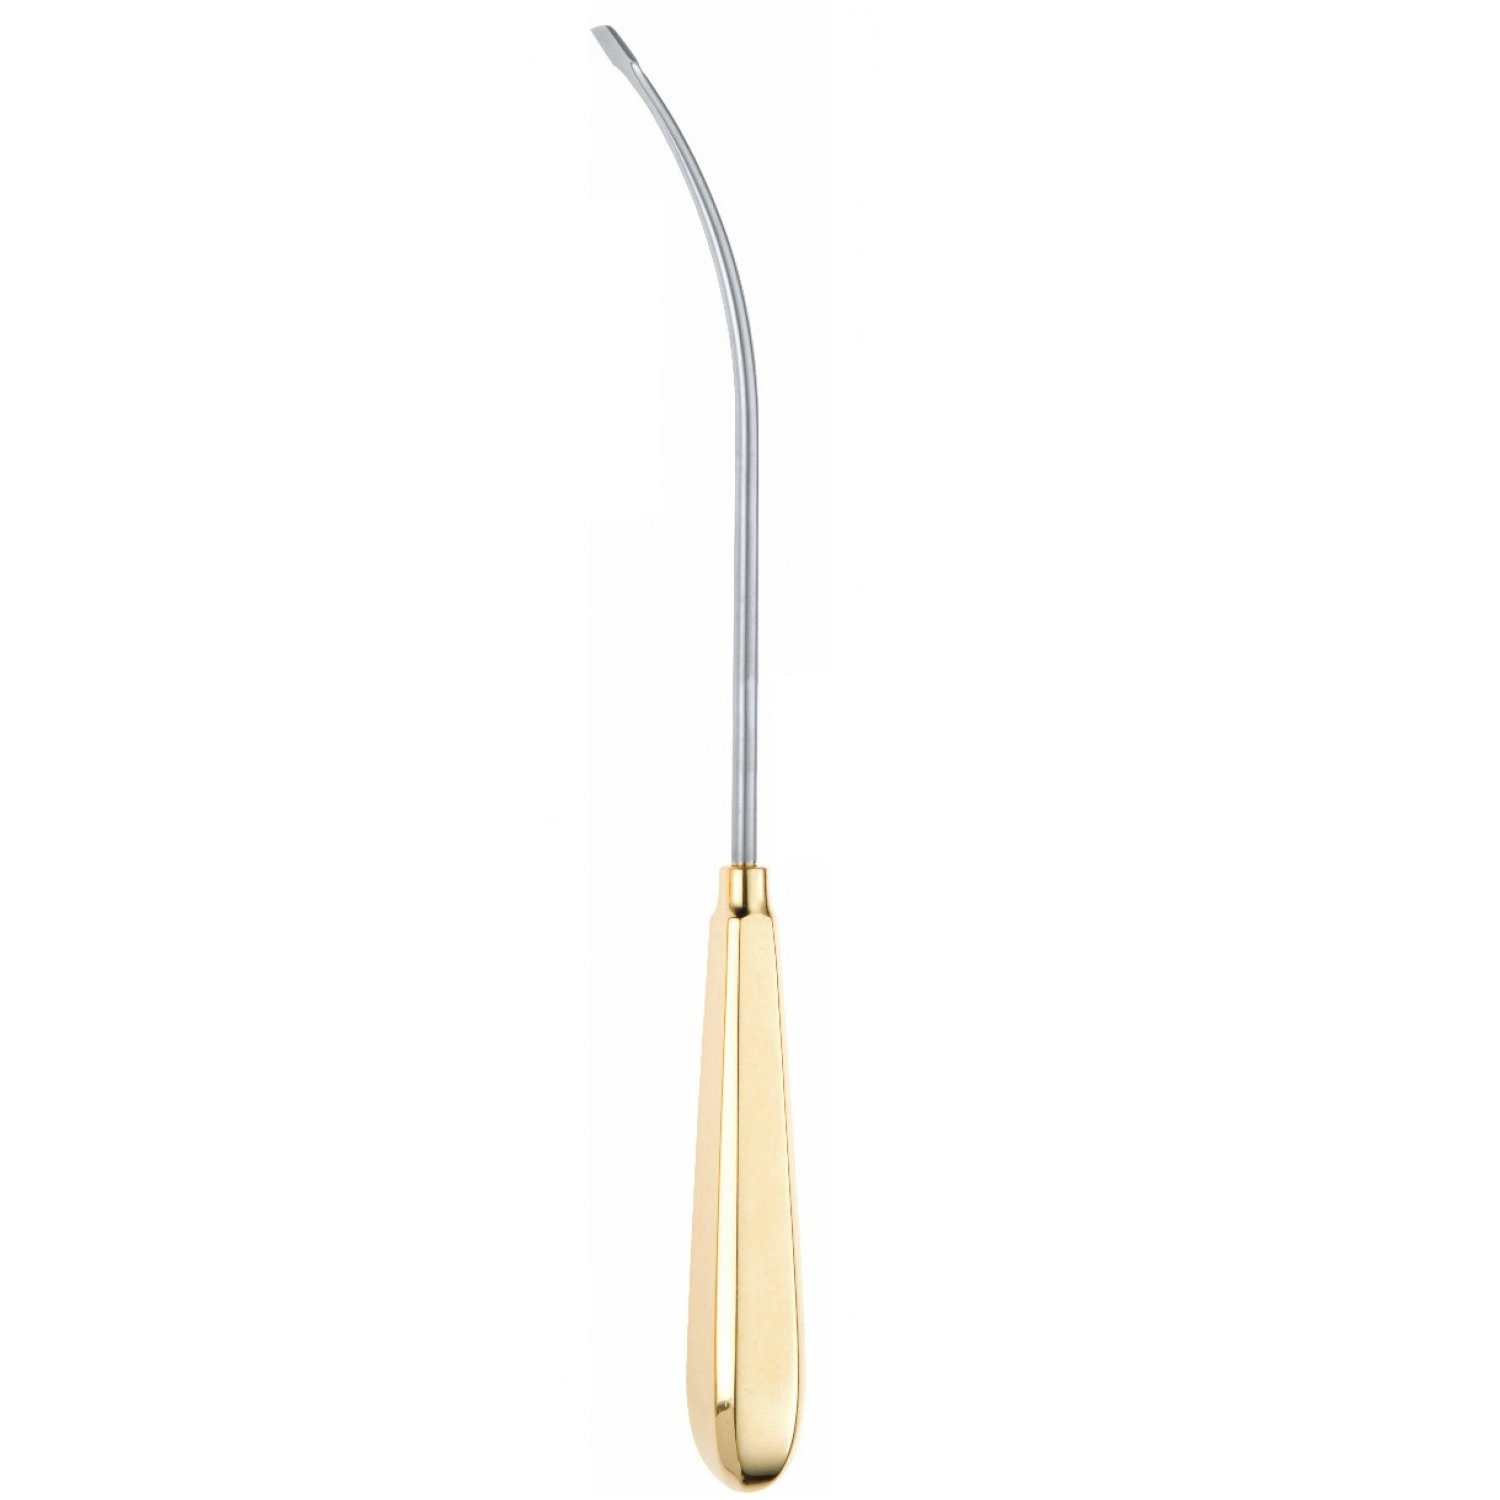 Endoscopic Forehead Temporal Line T-Dissector, Semi Curved, Tip width 12 mm, Length 23.5 cm